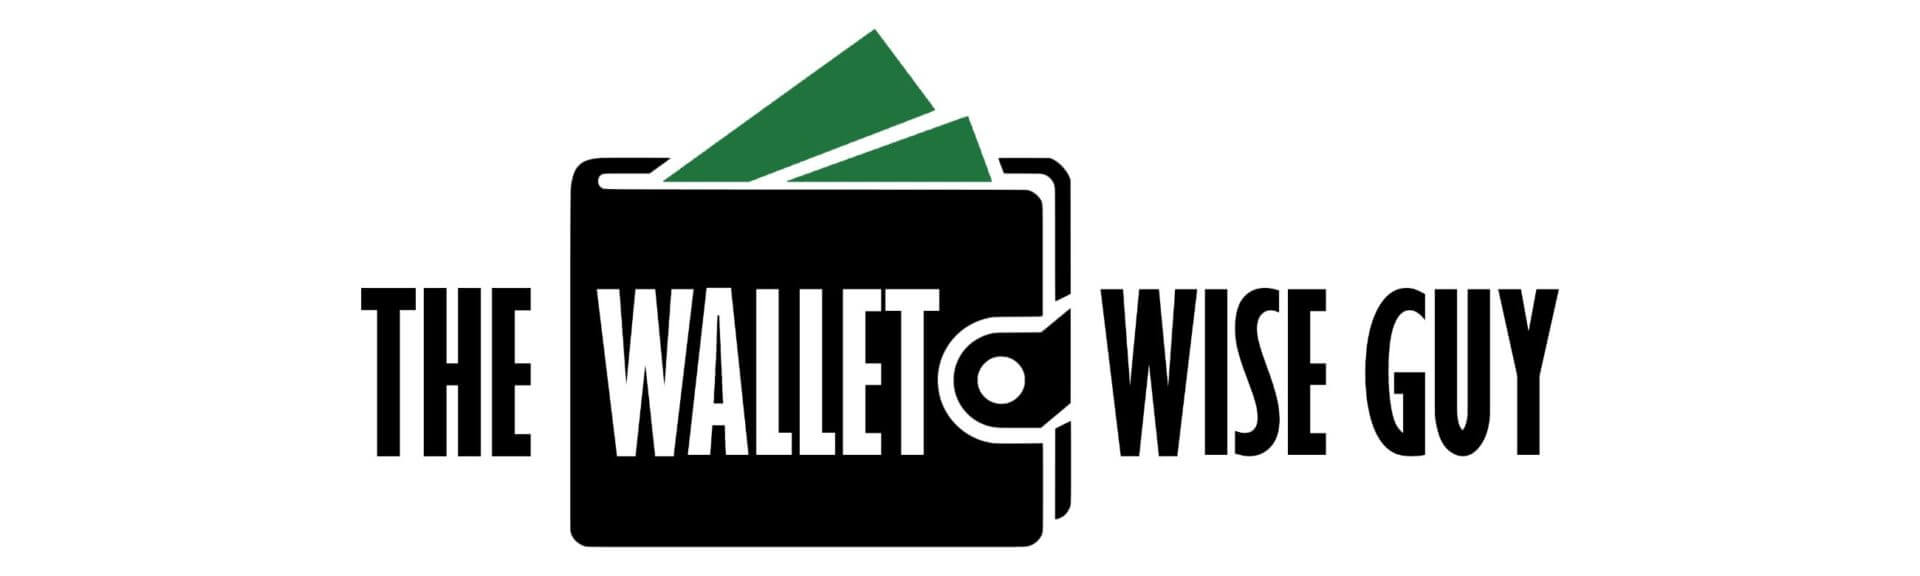 The Wallet Wise Guy